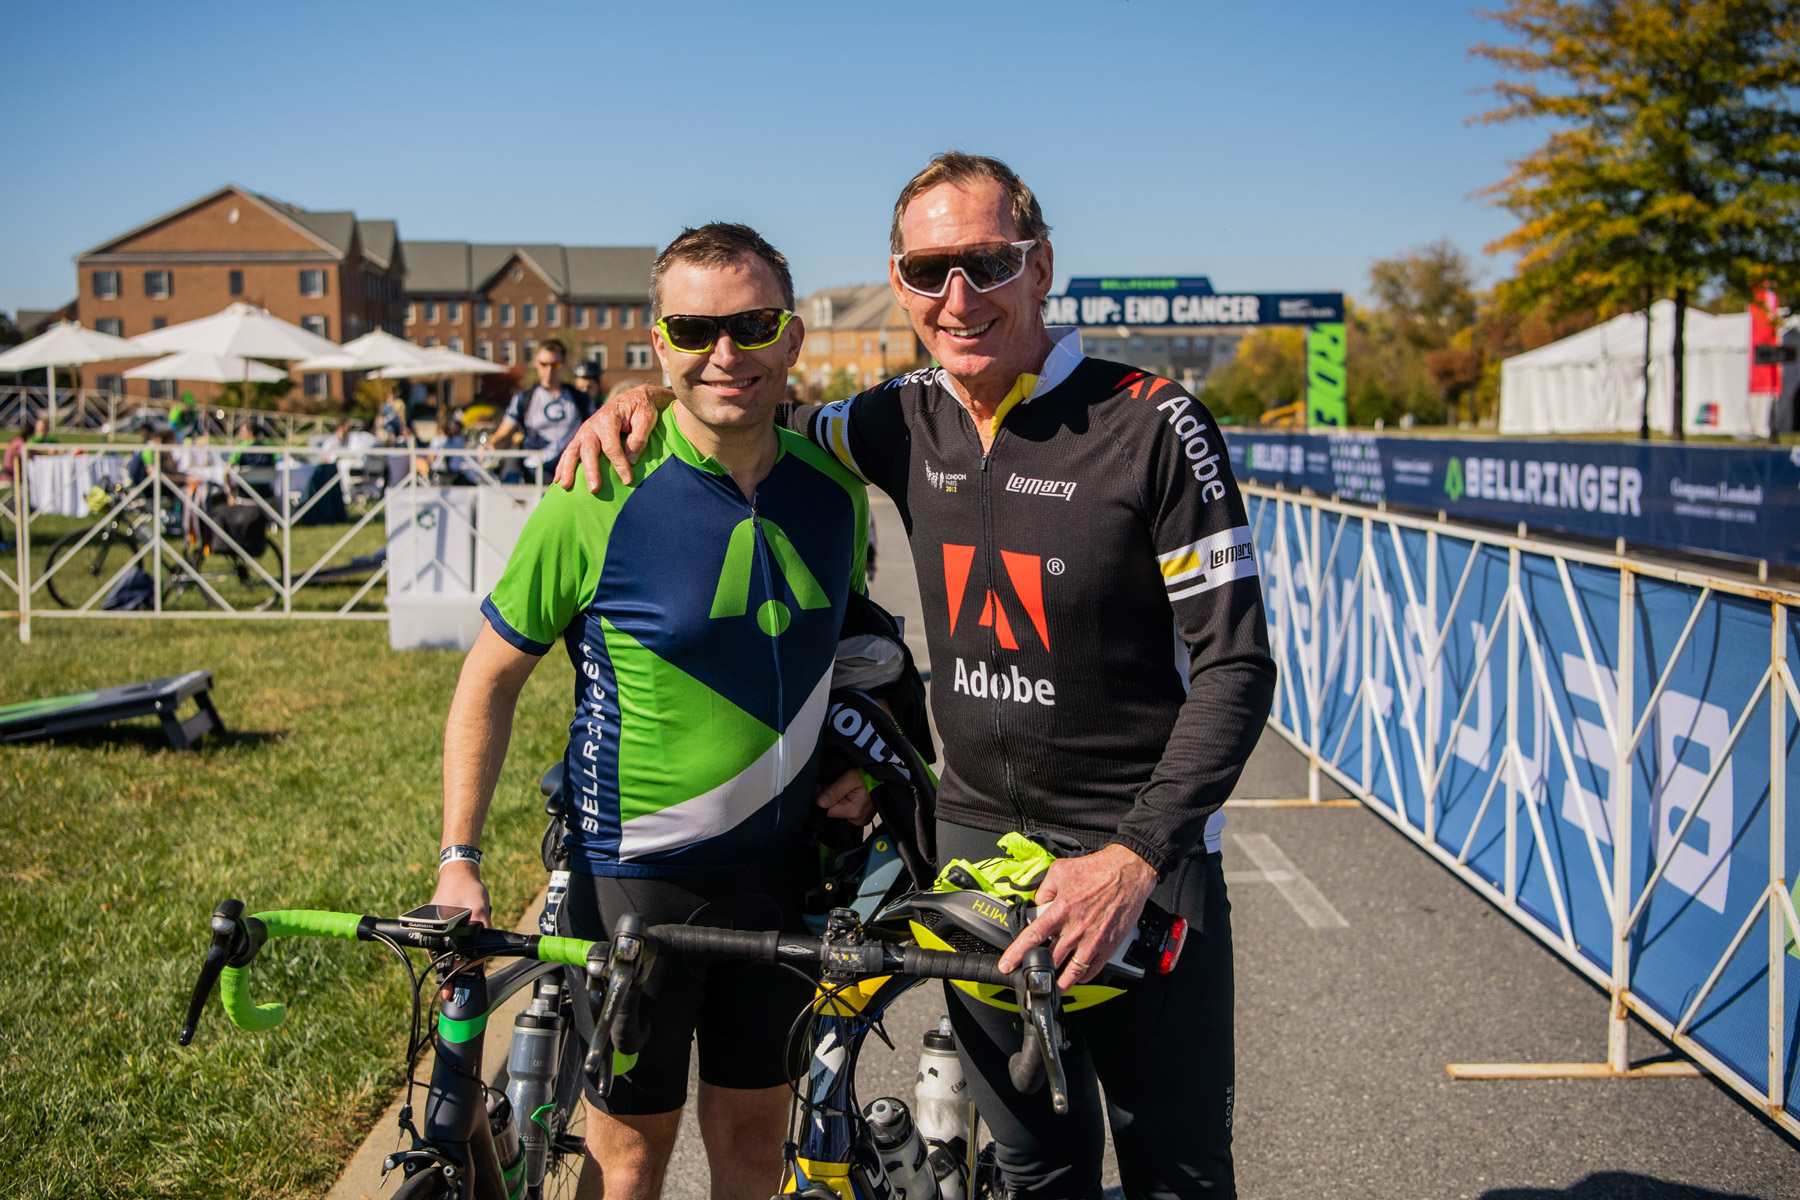 Two BellRinger riders posing with their bikes after finishing the ride